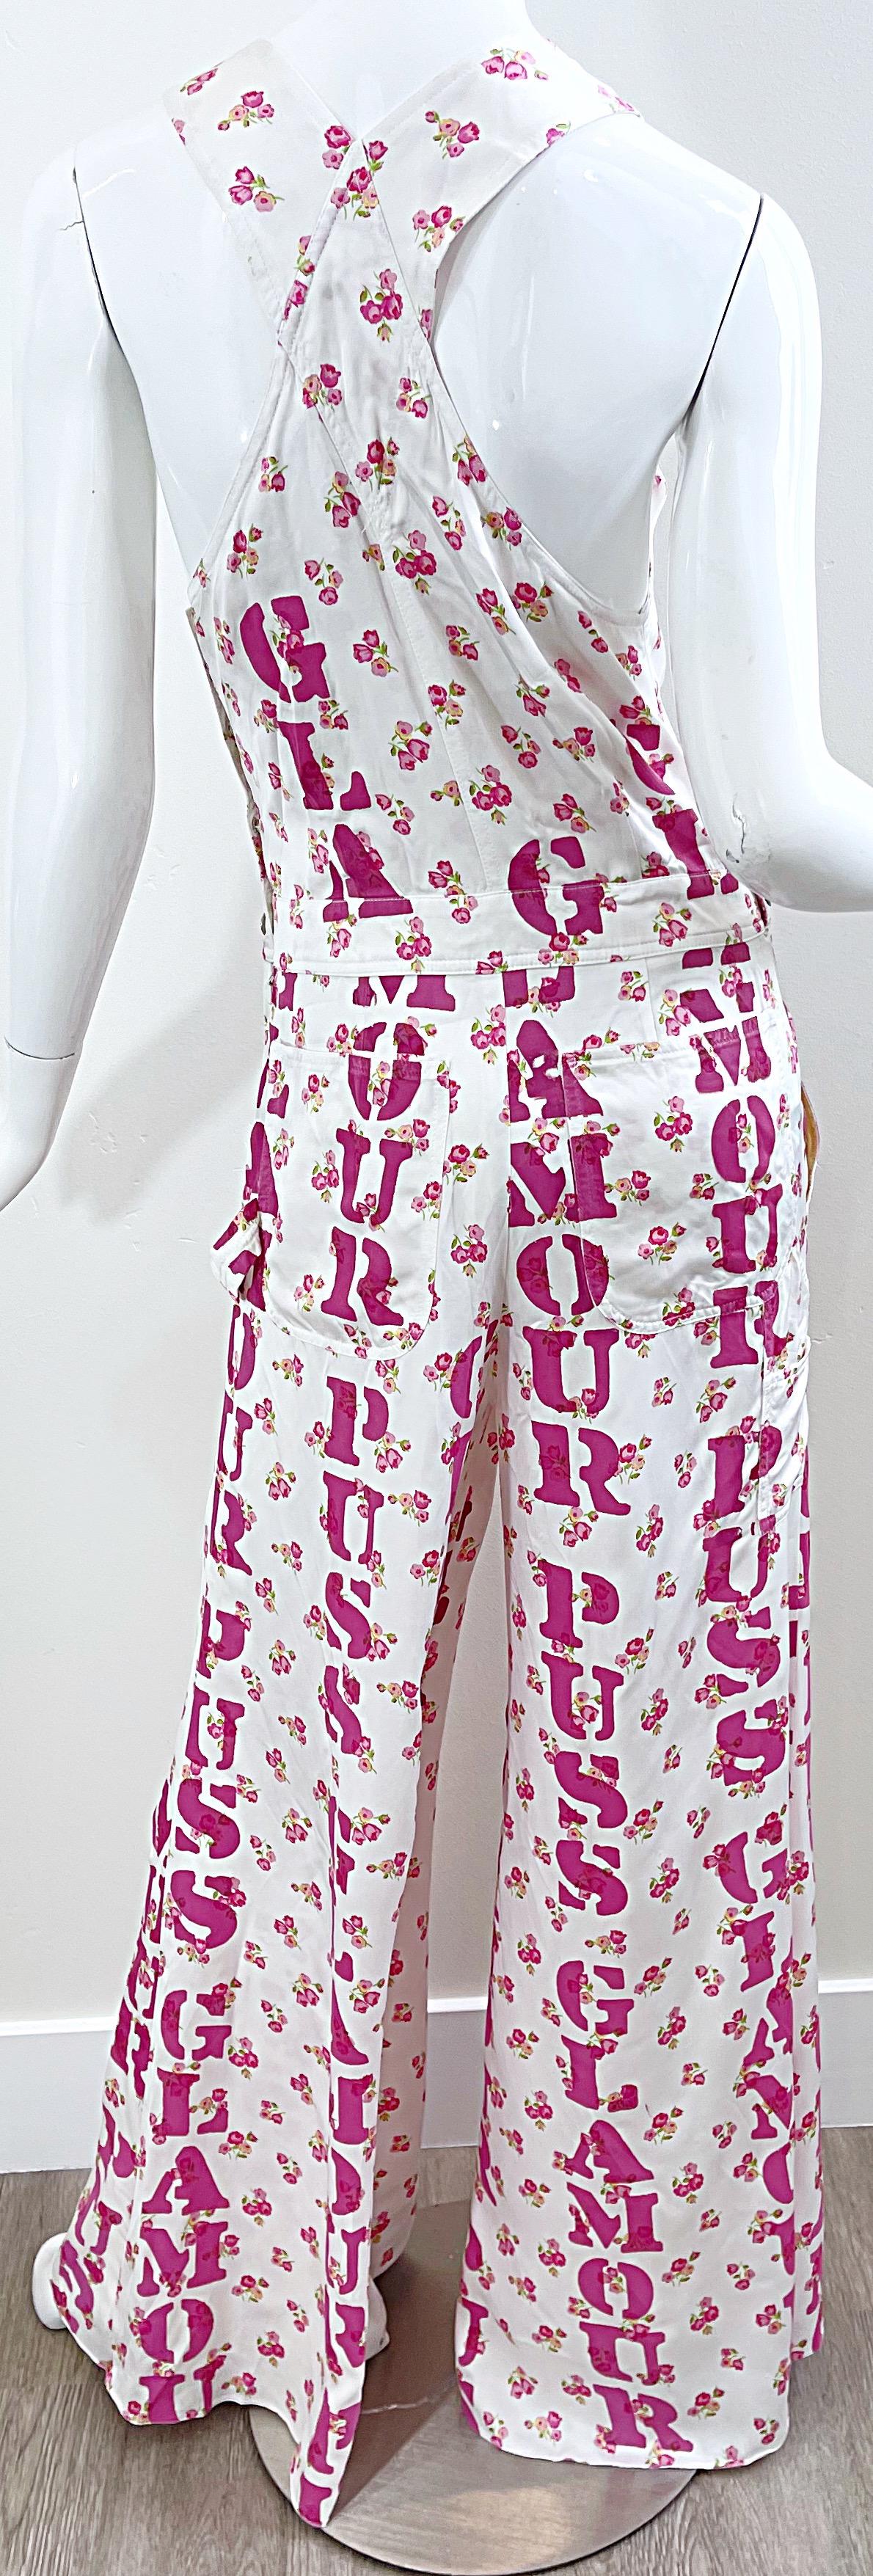 Moschino Couture Resort 2020 Size 8 Glamour Puss Flower Print Overalls Jumpsuit 7